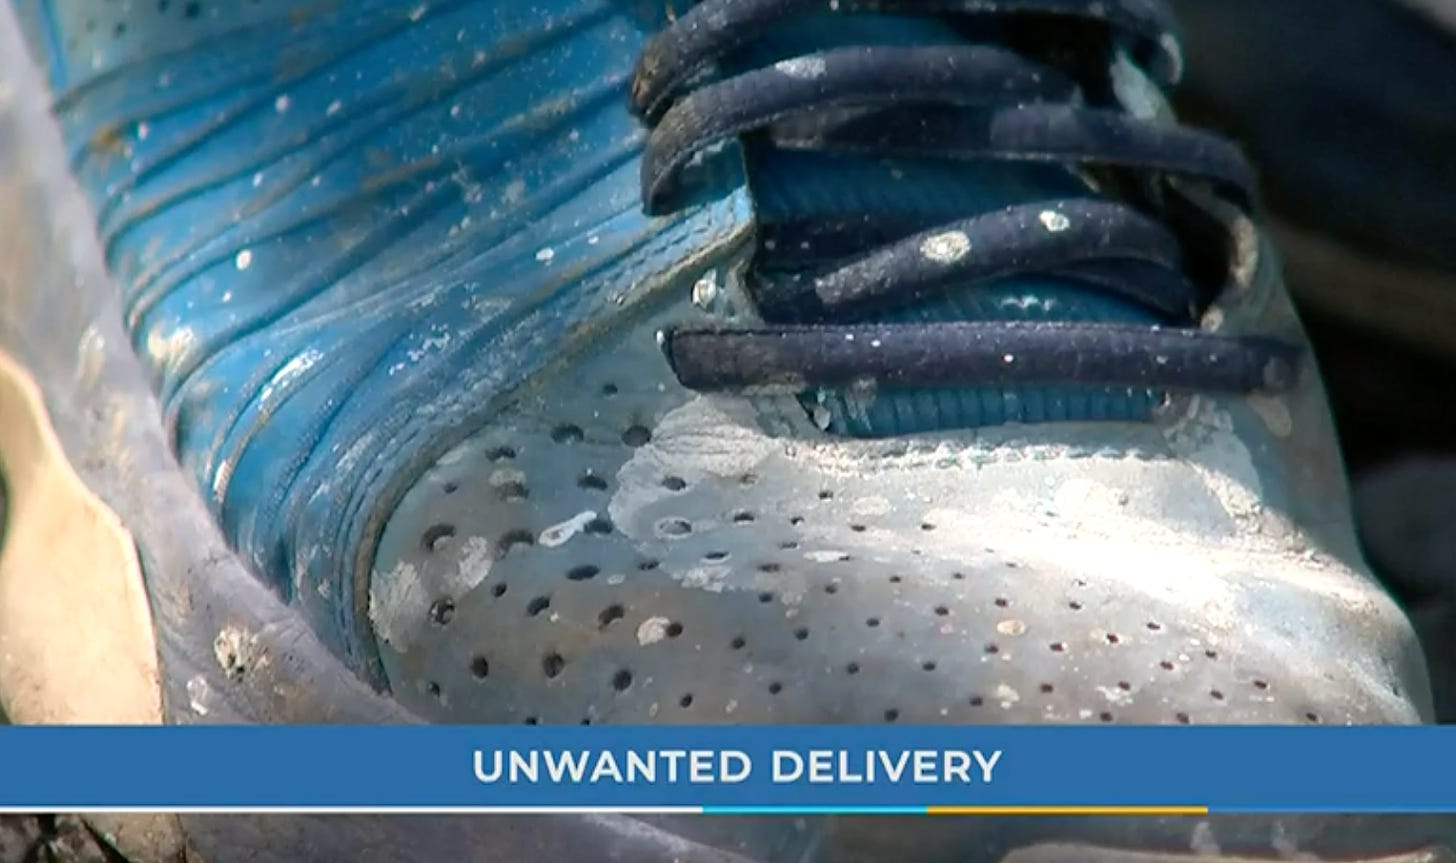 A news report still of a white tennis shoe with the words "unwanted delivery" appearing at the bottom